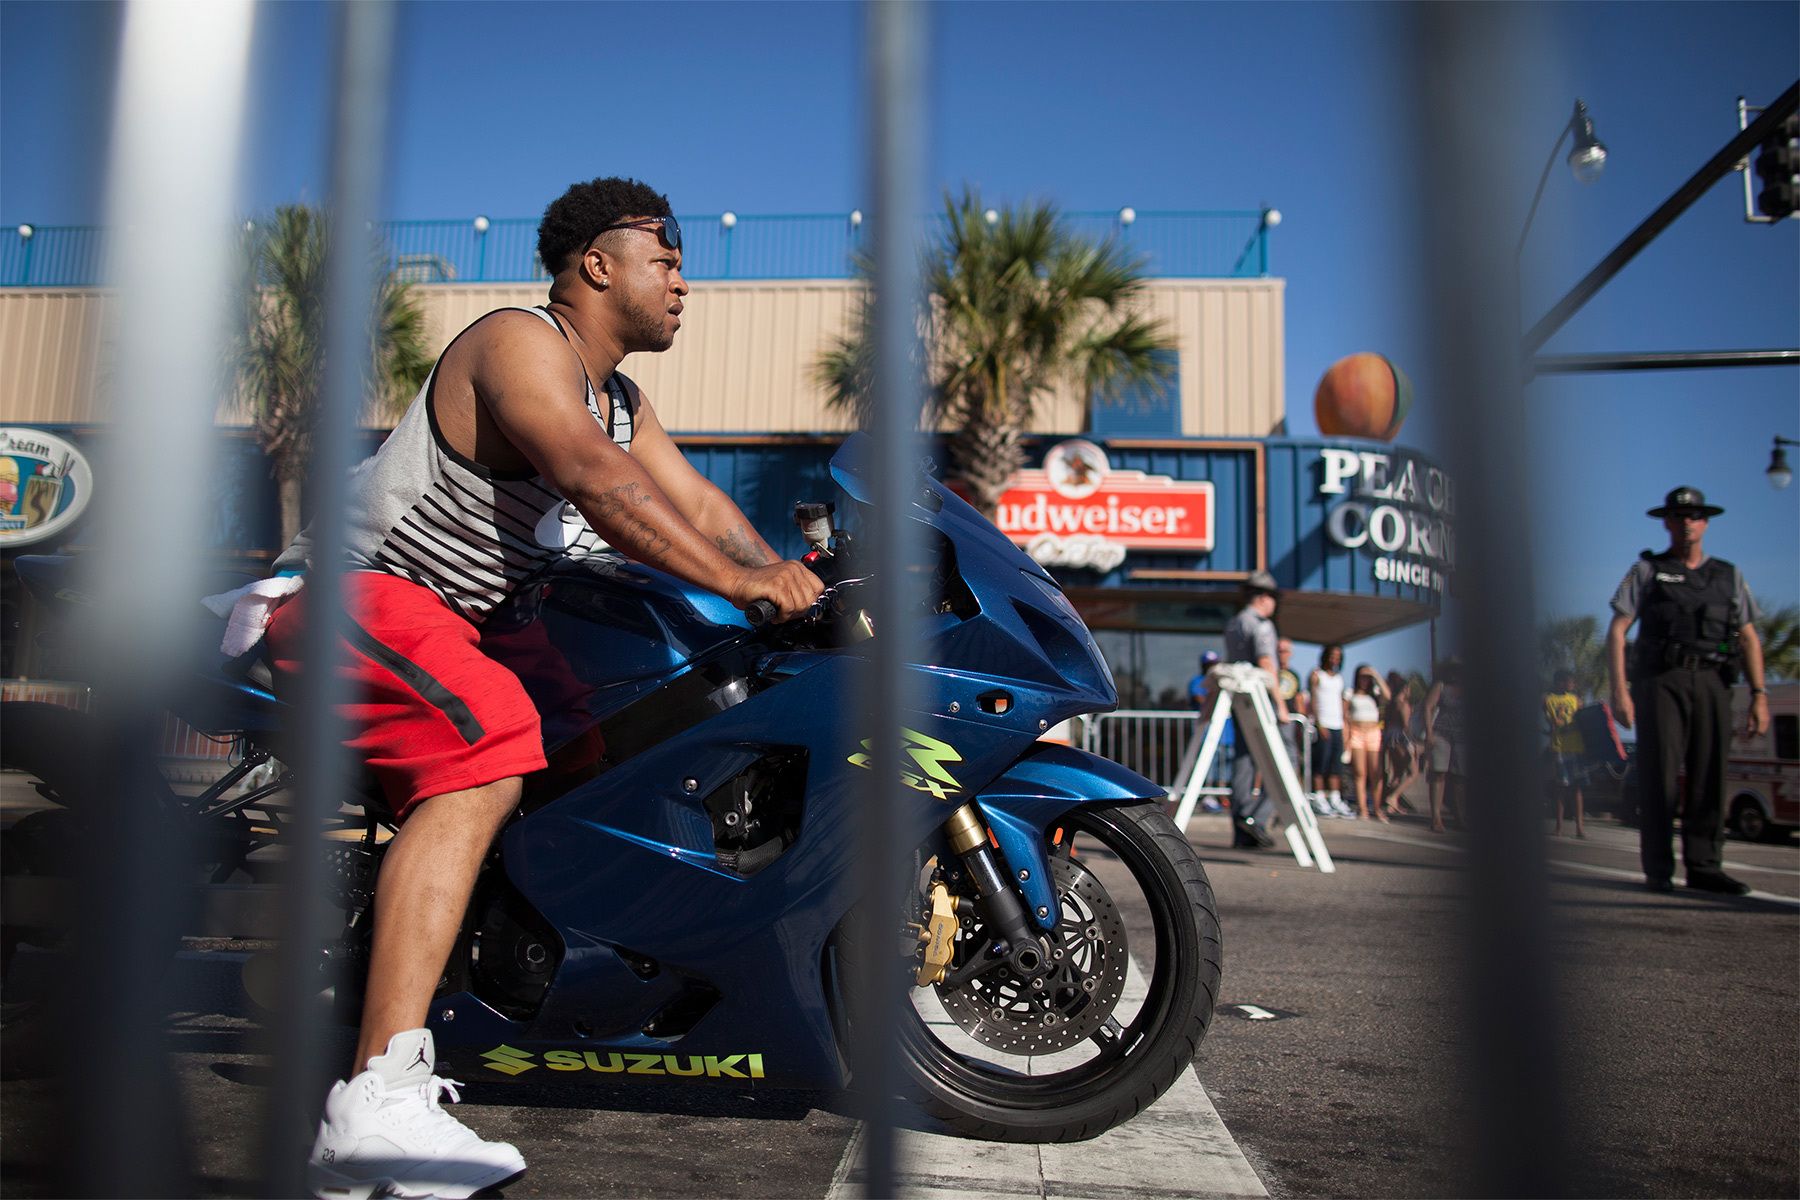 A biker is seen through the metal fencing blocking both sides of Ocean Boulevard during the 2015 Atlantic Beach Memorial Day BikeFest in Myrtle Beach, South Carolina May 24, 2015. After three people were killed and seven wounded in shootings during 2014 Bikefest, State officials called for an end to the event that draws thousands to the family-friendly beach town. Their efforts were unsuccessful. Bikers returned to Myrtle Beach - just a week after a bloody motorcycle gang shootout in Waco, Texas. But this time authorities are more prepared, with dozens of new surveillance cameras and a police force three times the size of last year's. REUTERS/Randall Hill